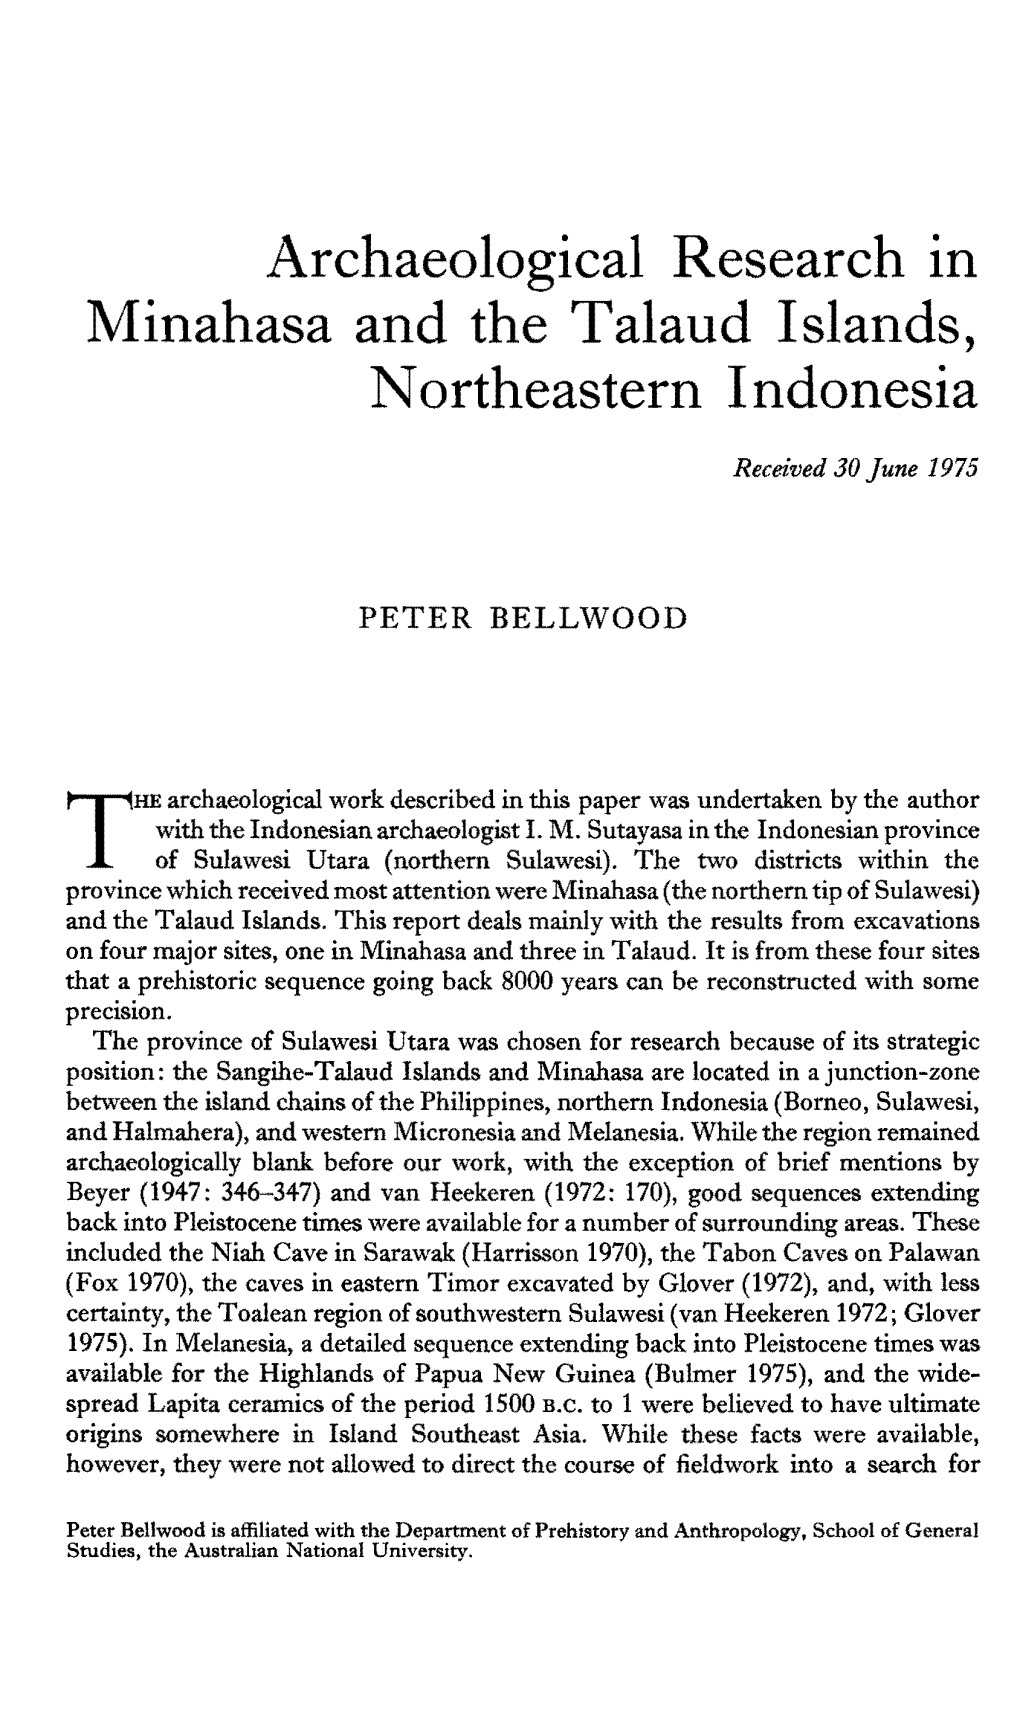 Archaeological Research in Minahasa and the Talaud Islands, Northeastern Indonesia